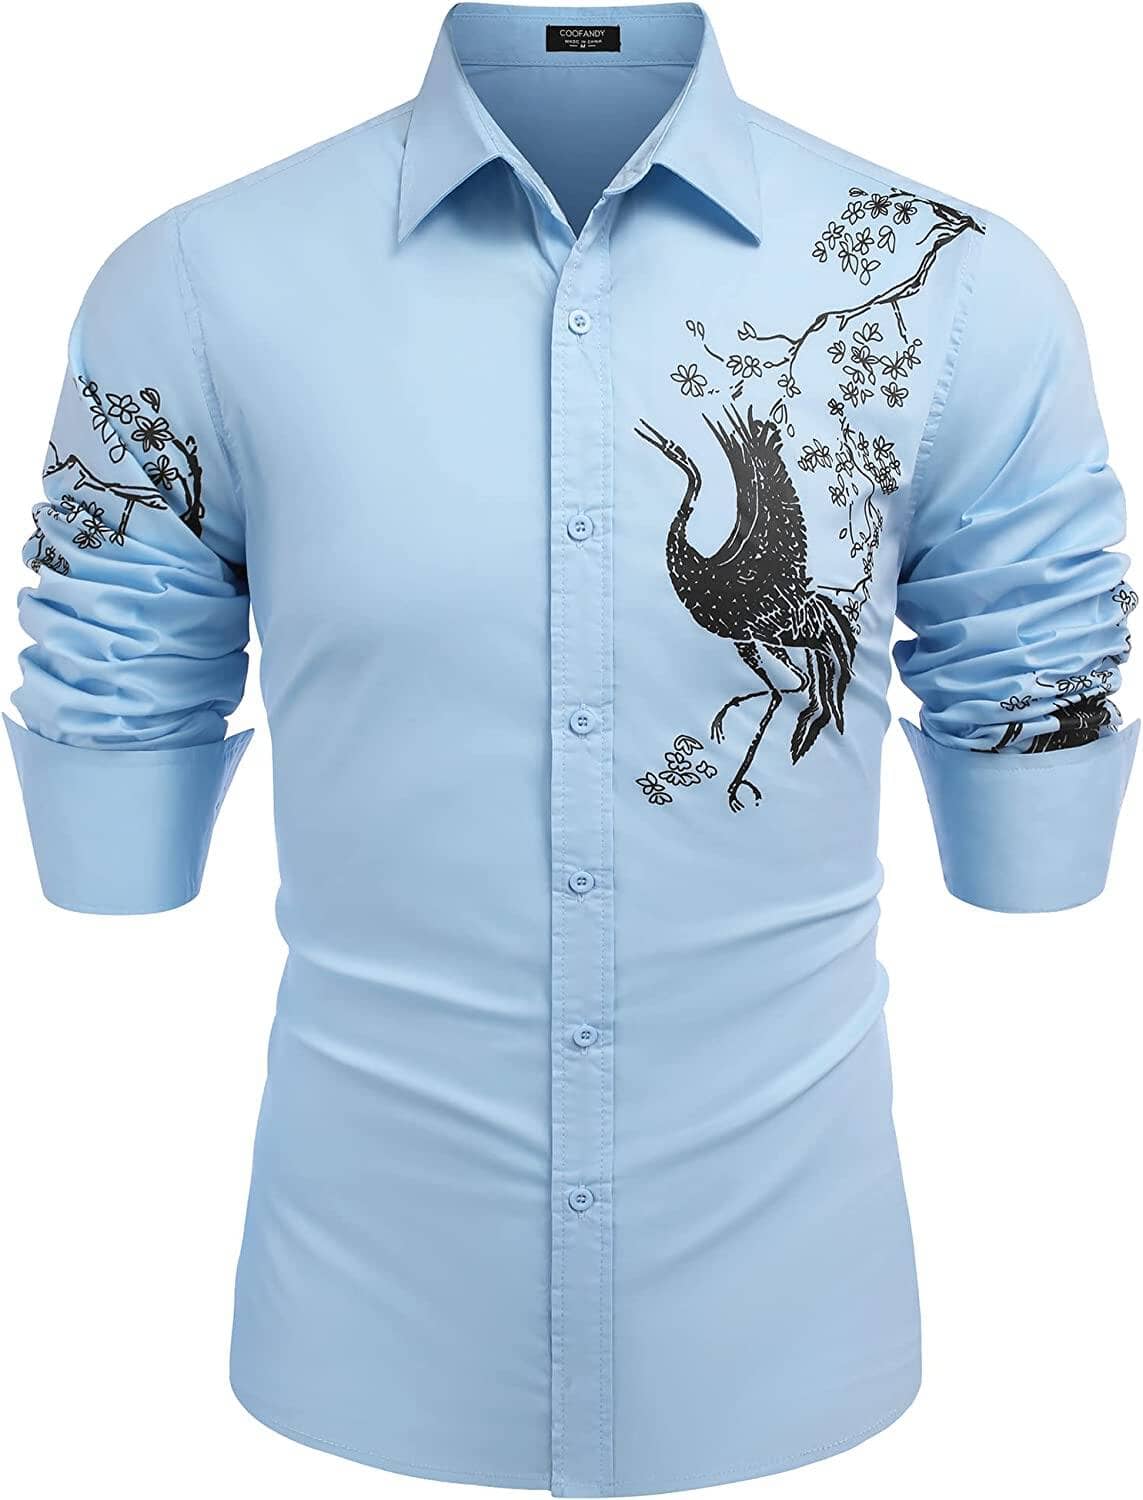 Rose Printed Slim Fit Dress Shirts (US Only) Shirts coofandy Light Blue S 